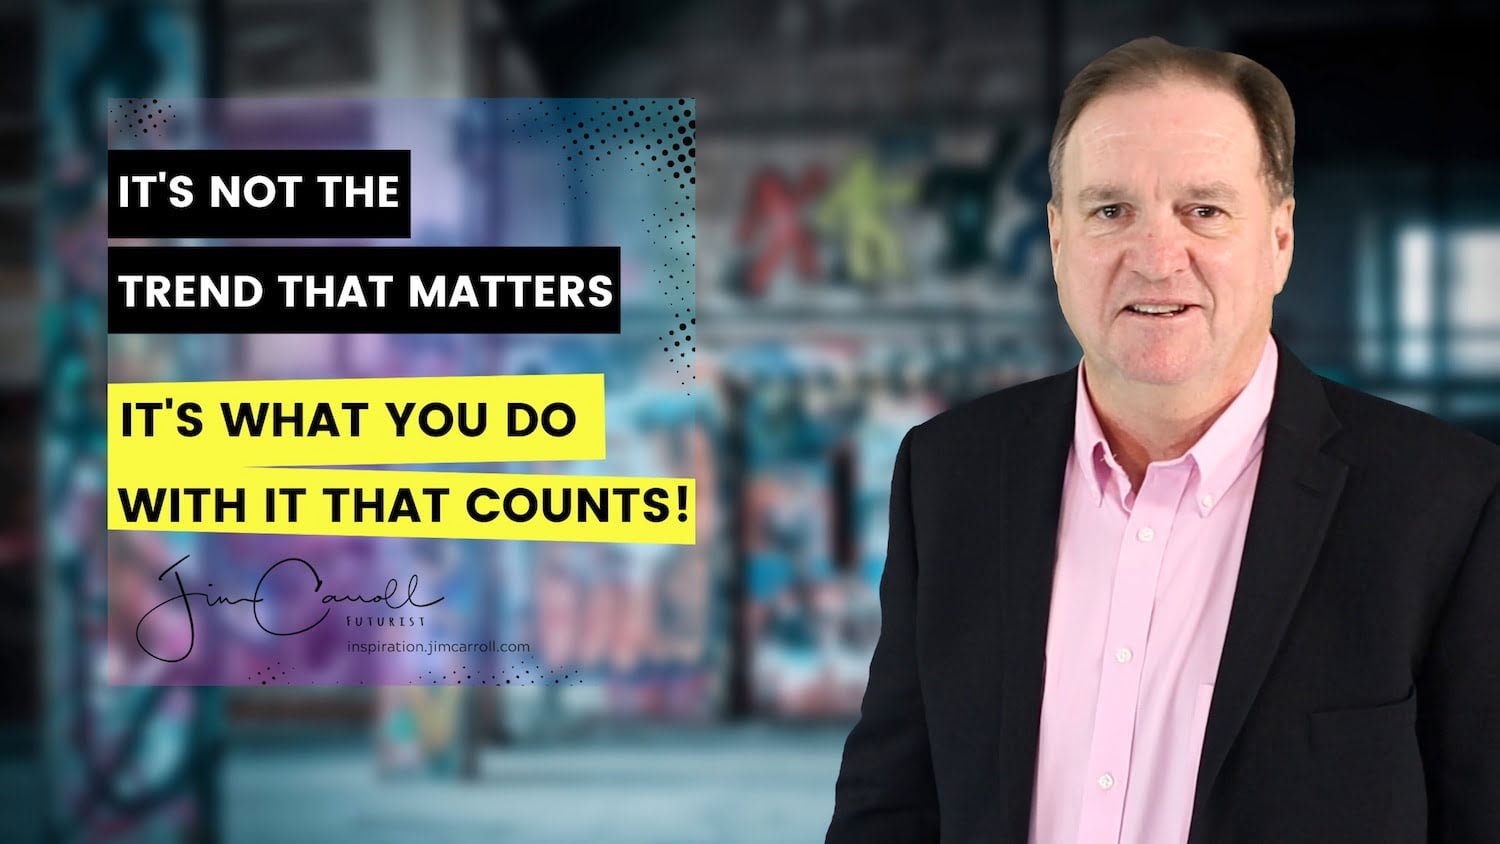 Daily Inspiration: "It's not the trend that matters - it's what you do with it that counts!"